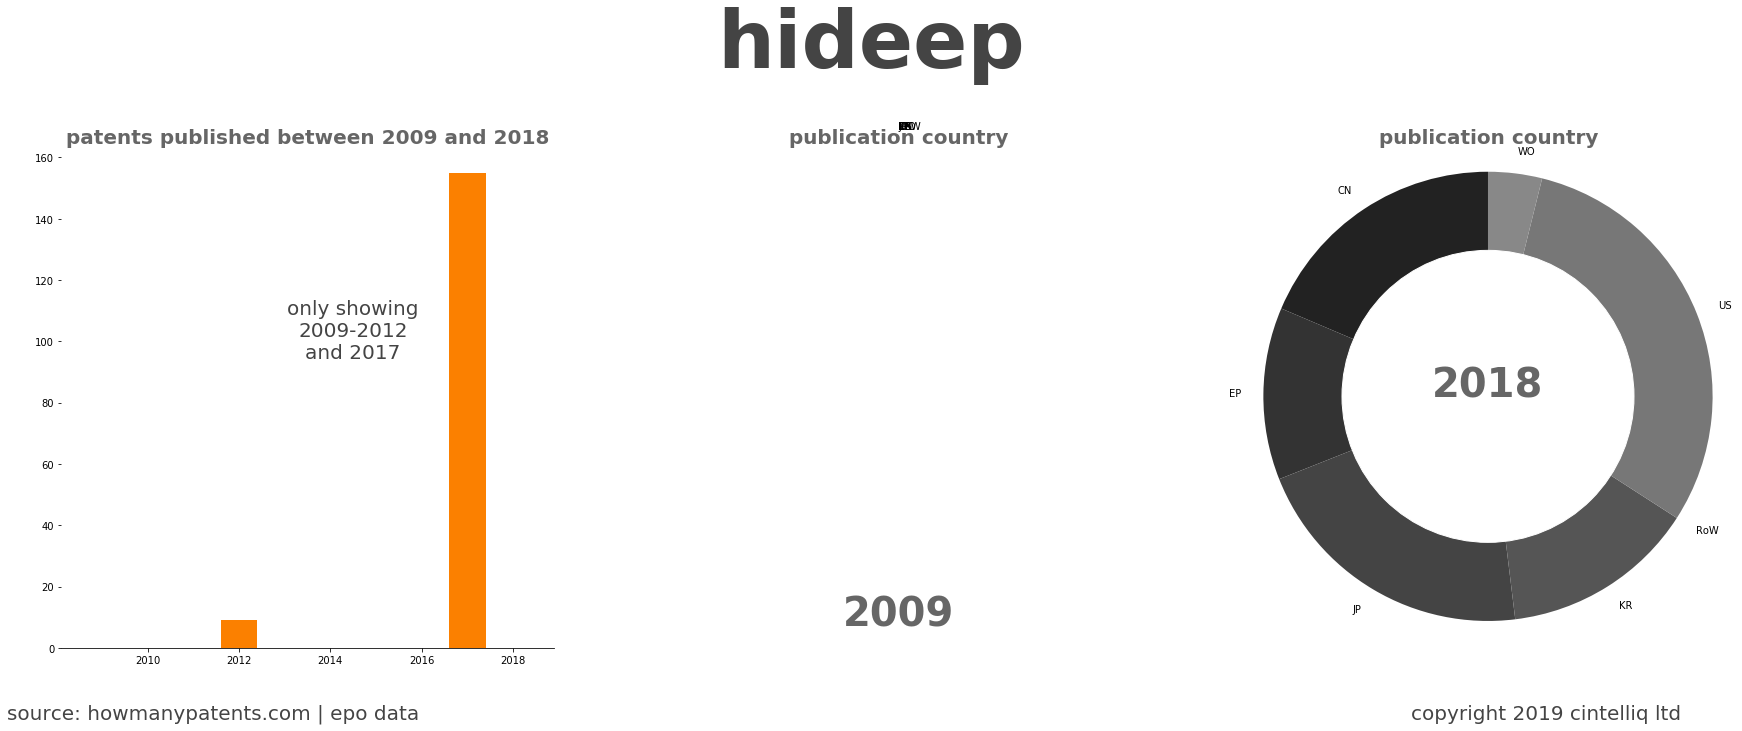 summary of patents for Hideep